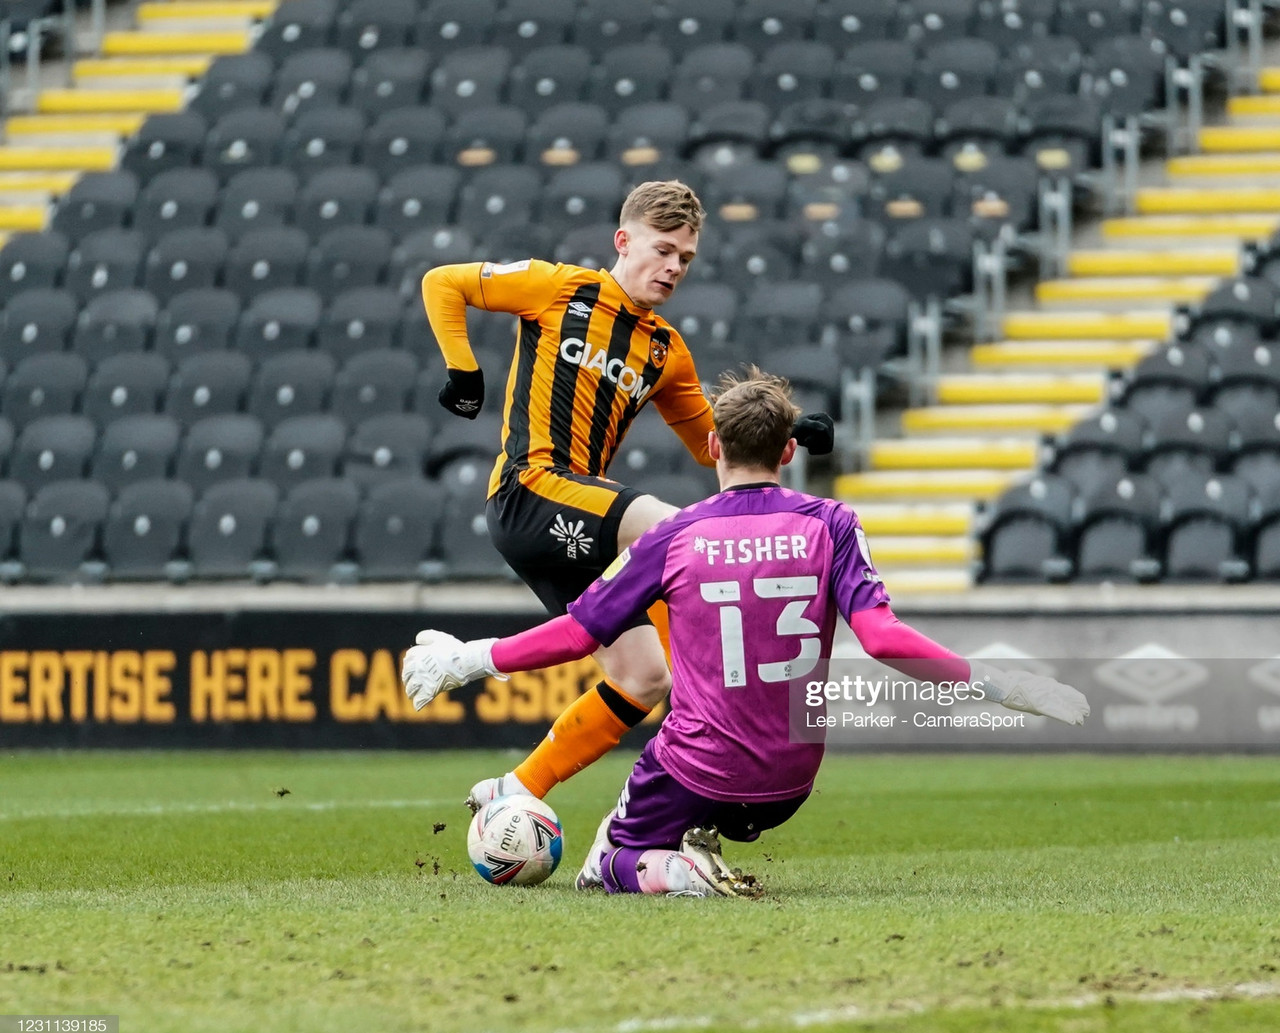 Hull City 0-1 MK Dons: Fraser penalty punishes misfiring Tigers